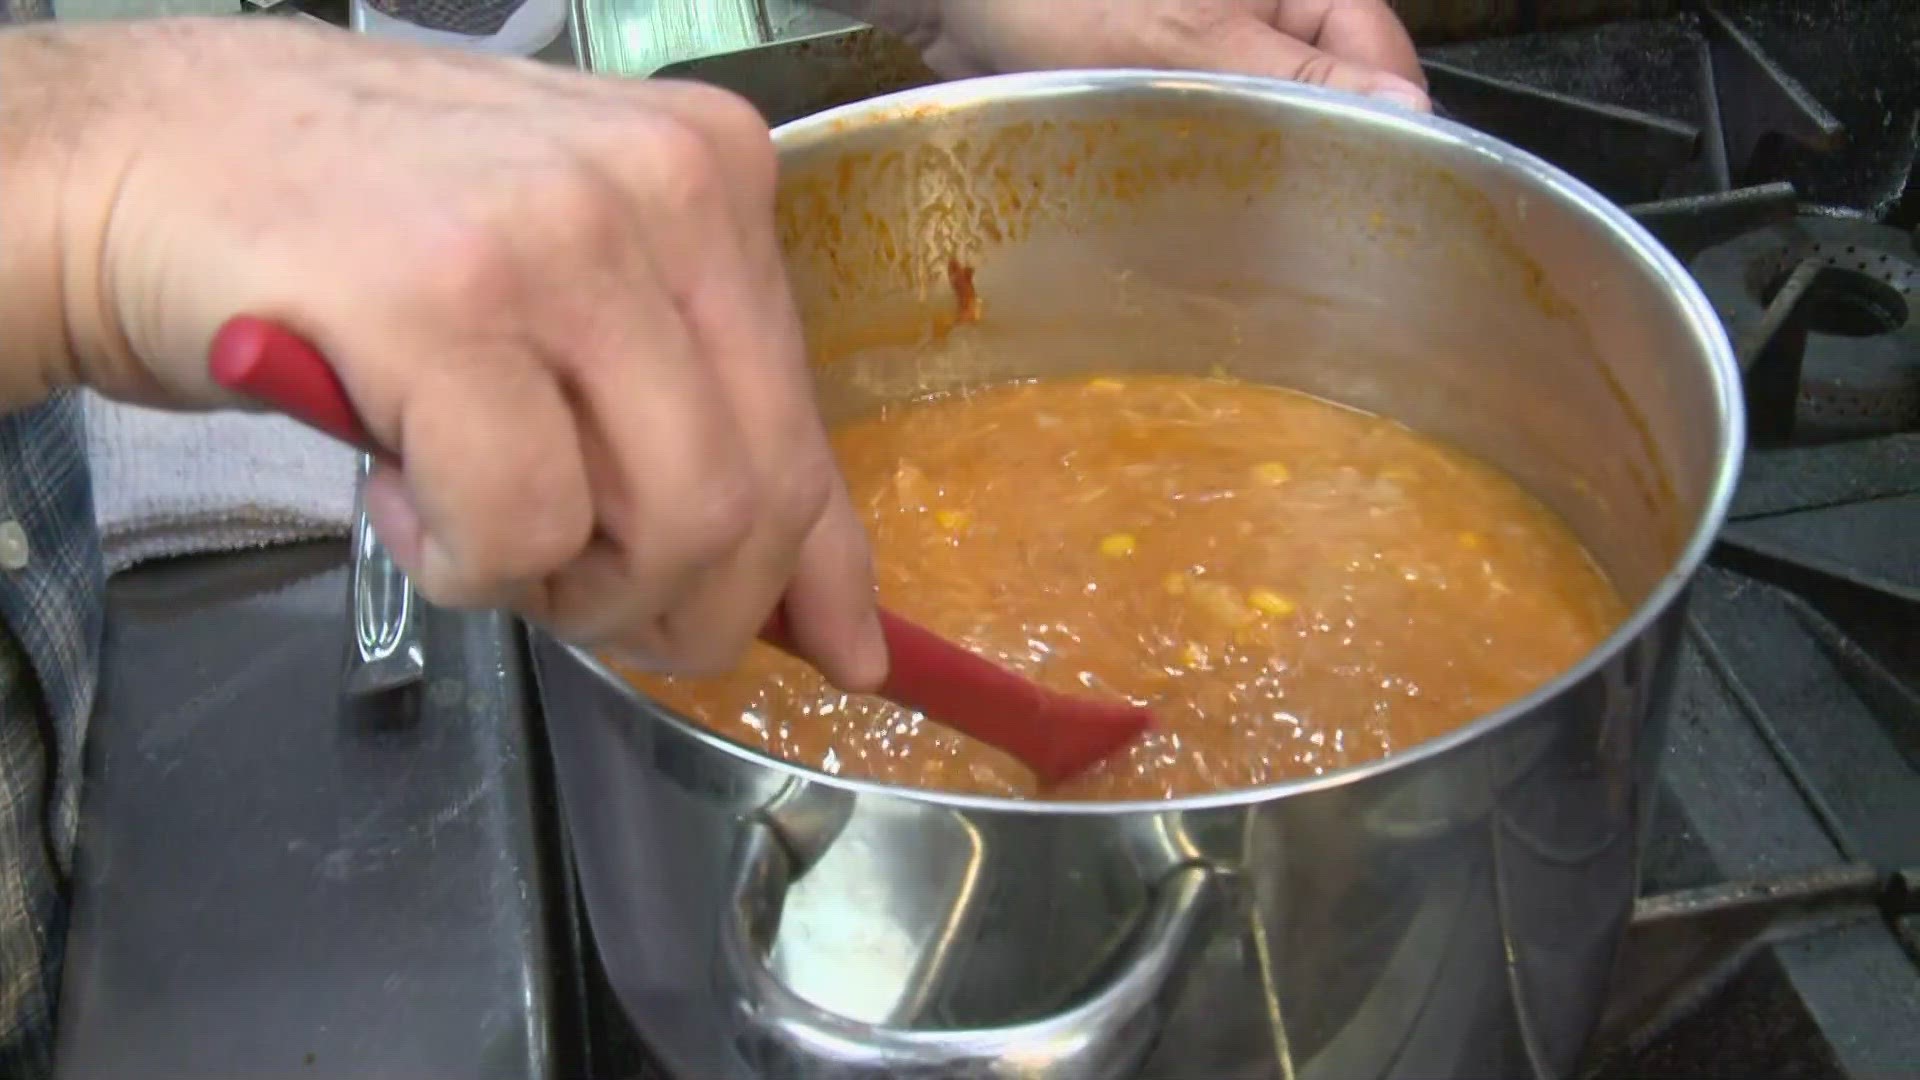 Many people will face-off at the Annual Burgoo competition.